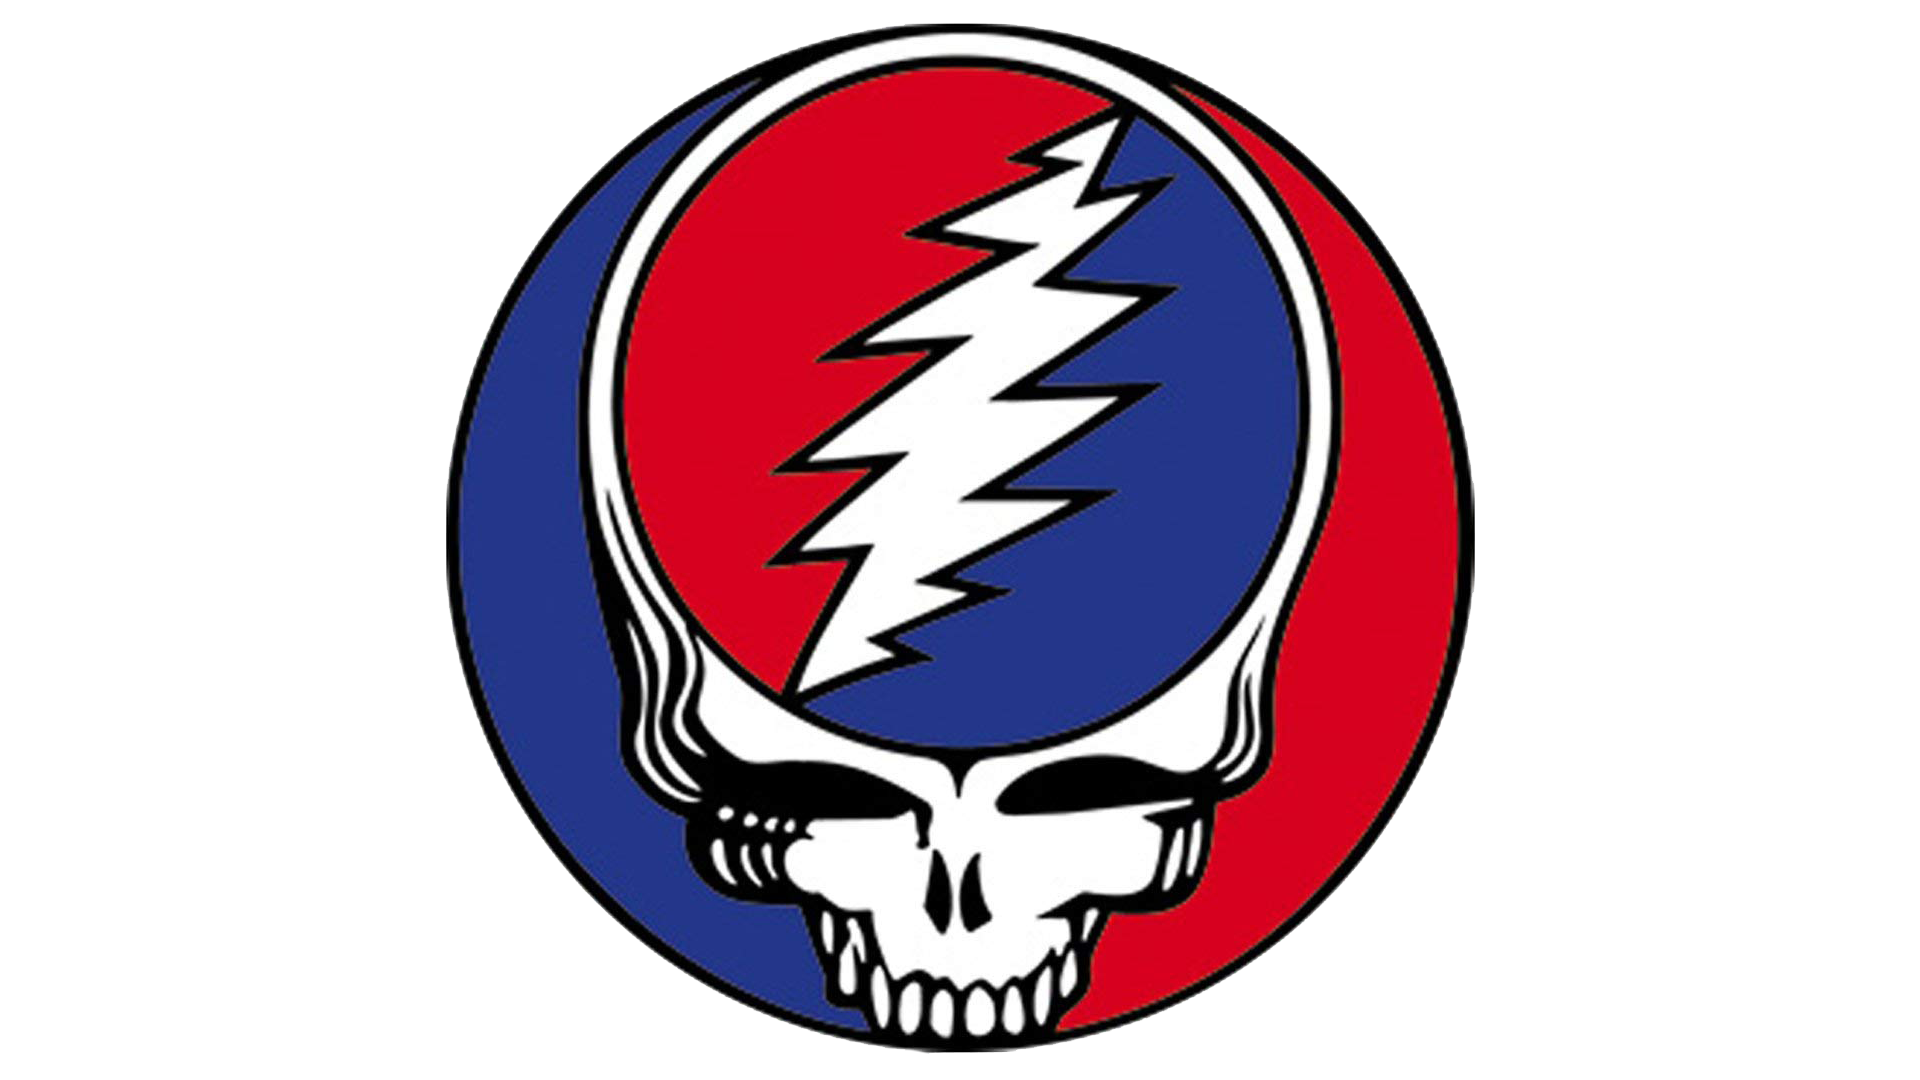 Grateful Dead logo and symbol, meaning, history, PNG